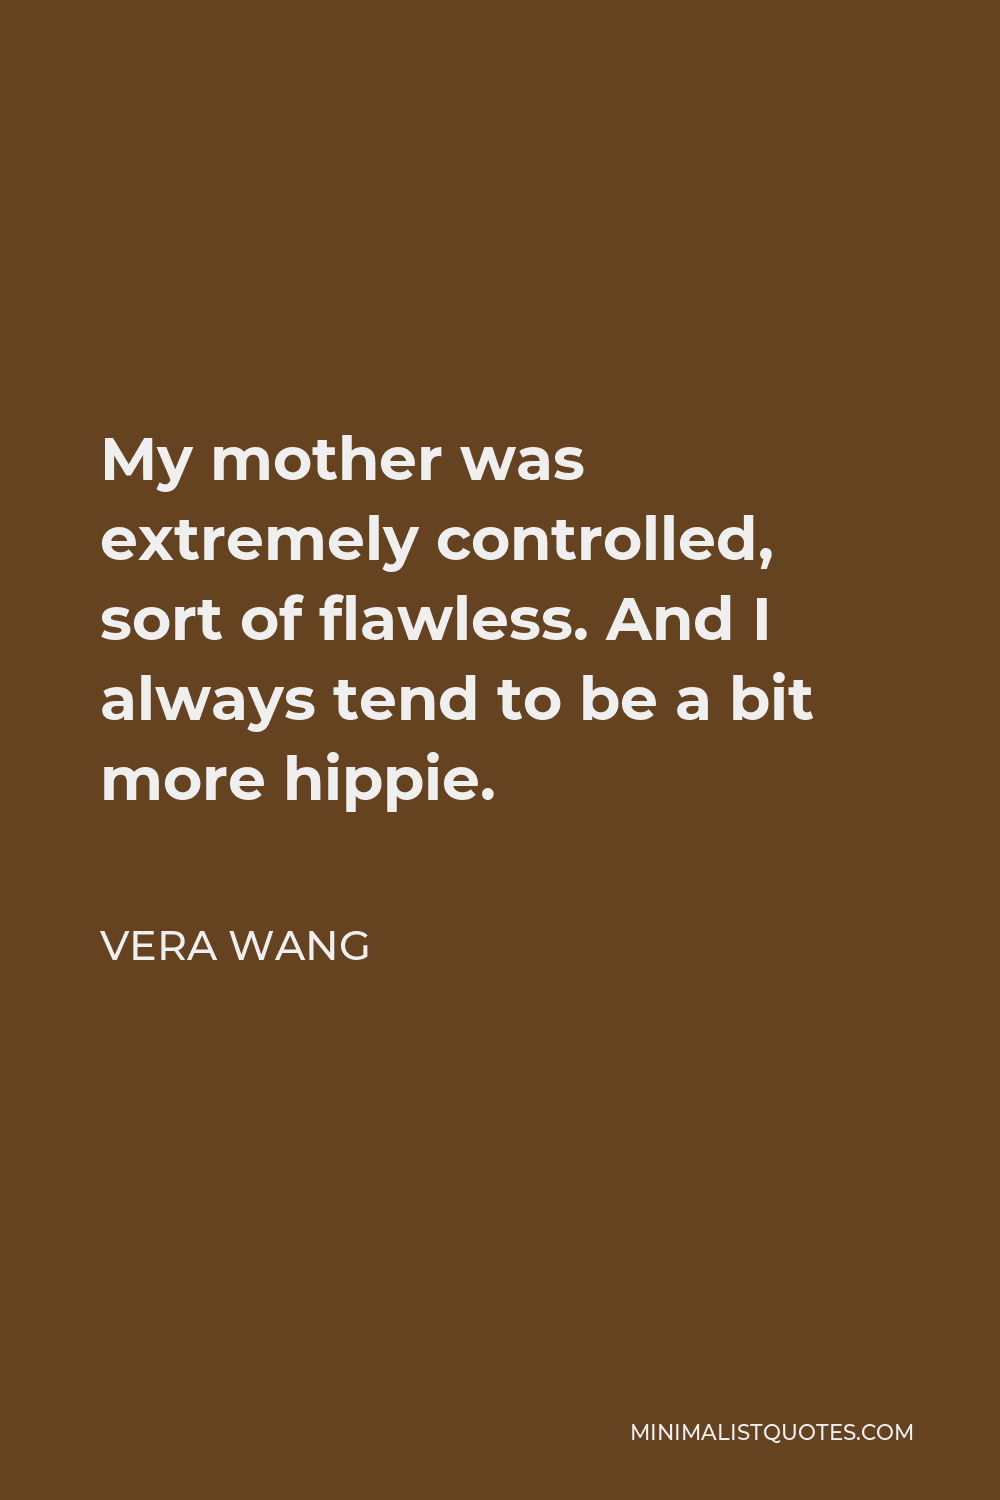 Vera Wang Quote - My mother was extremely controlled, sort of flawless. And I always tend to be a bit more hippie.